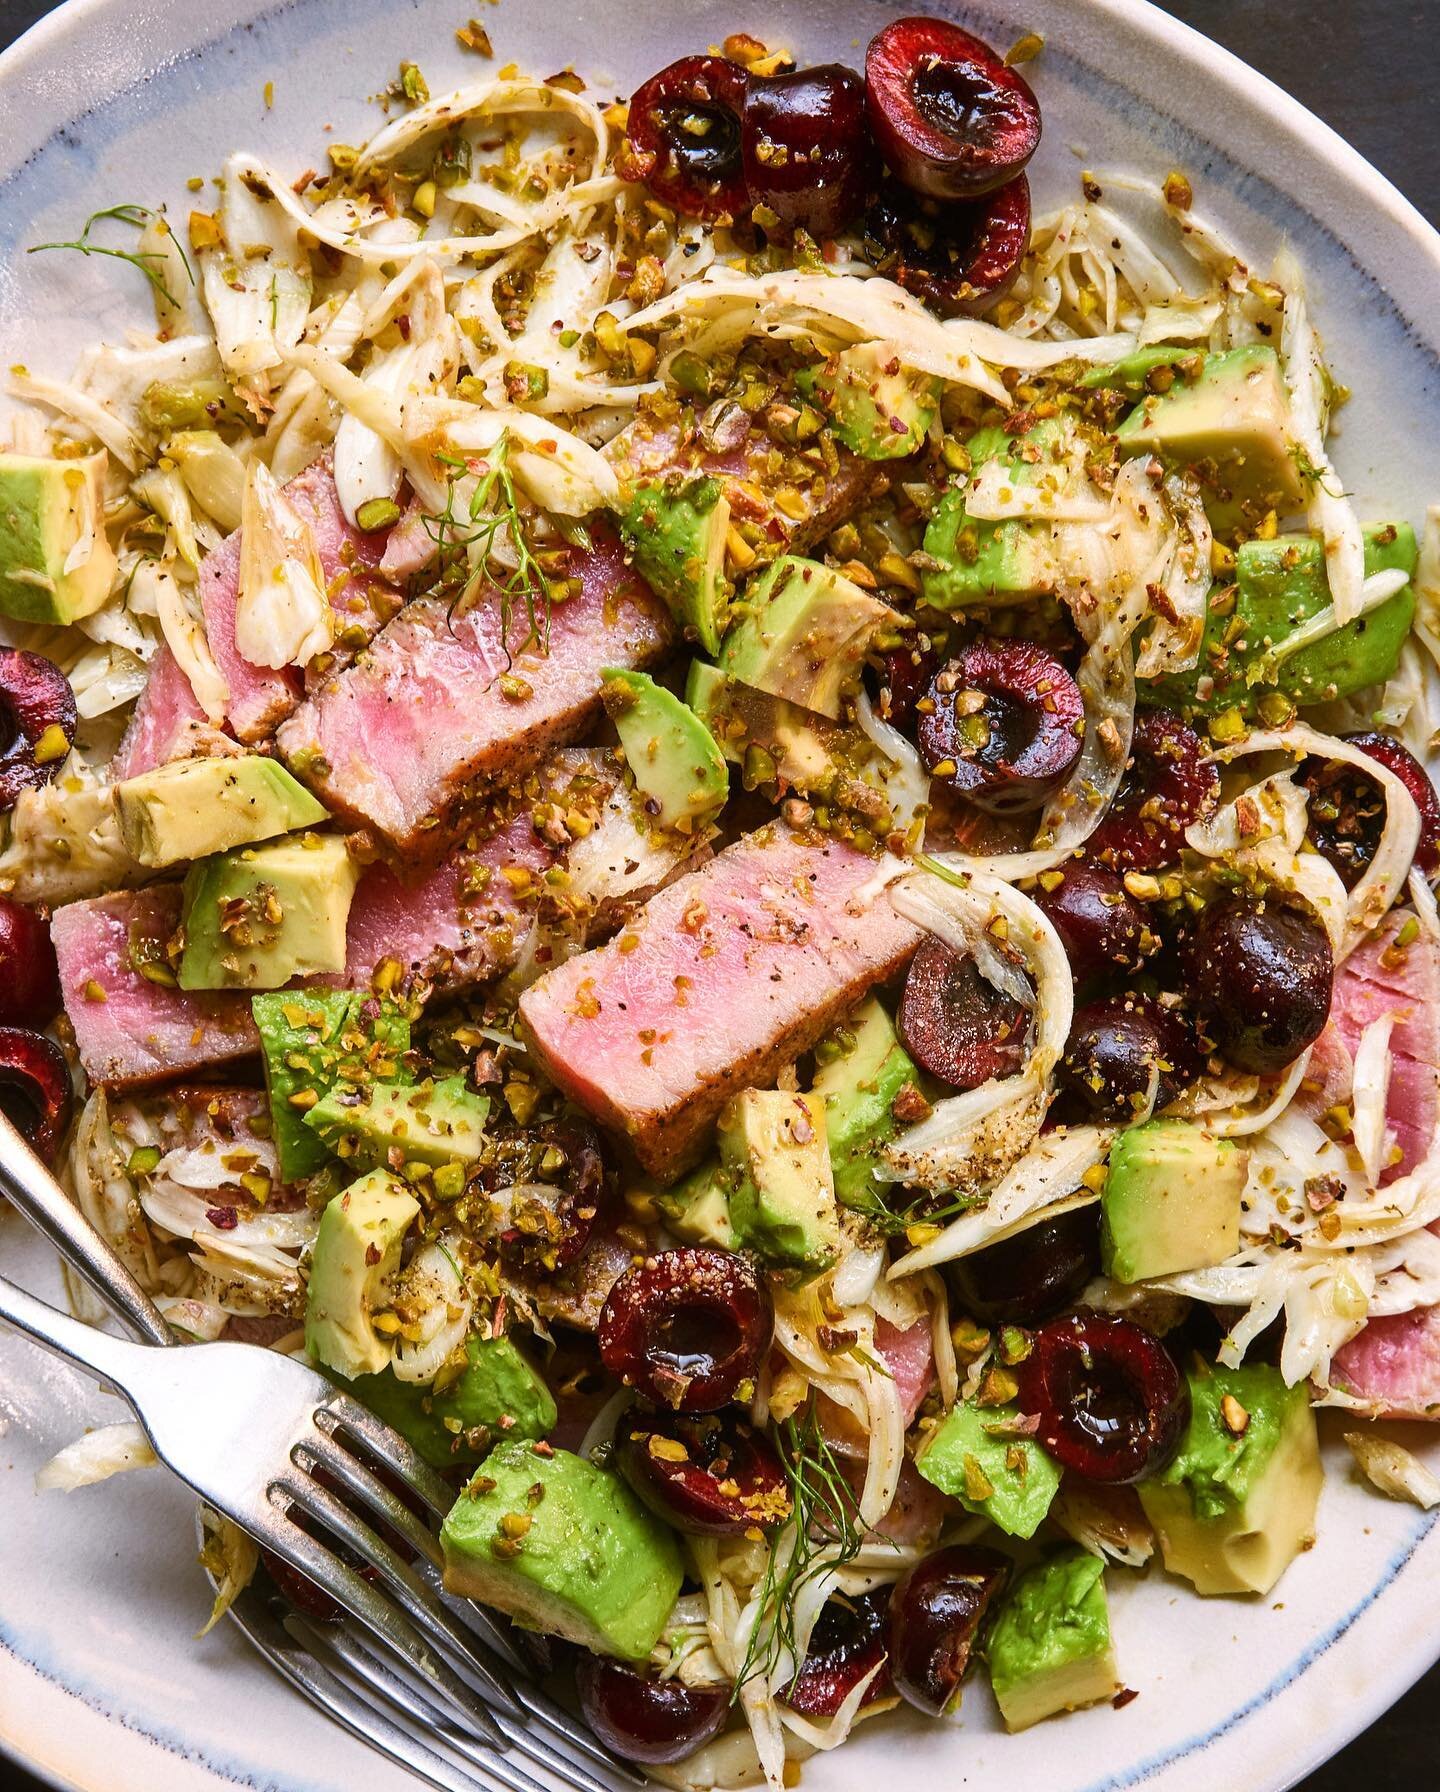 Y&rsquo;ALL. By now a *whole lot of you* have either made my recipes or come to dine at our sweet @catbirdcottage , and you know I would NEVER lead you astray! THIS RECIPE IS BLISS. Kissed-in-the-pan seared tuna, umami-dressed crunchy fennel, avocado